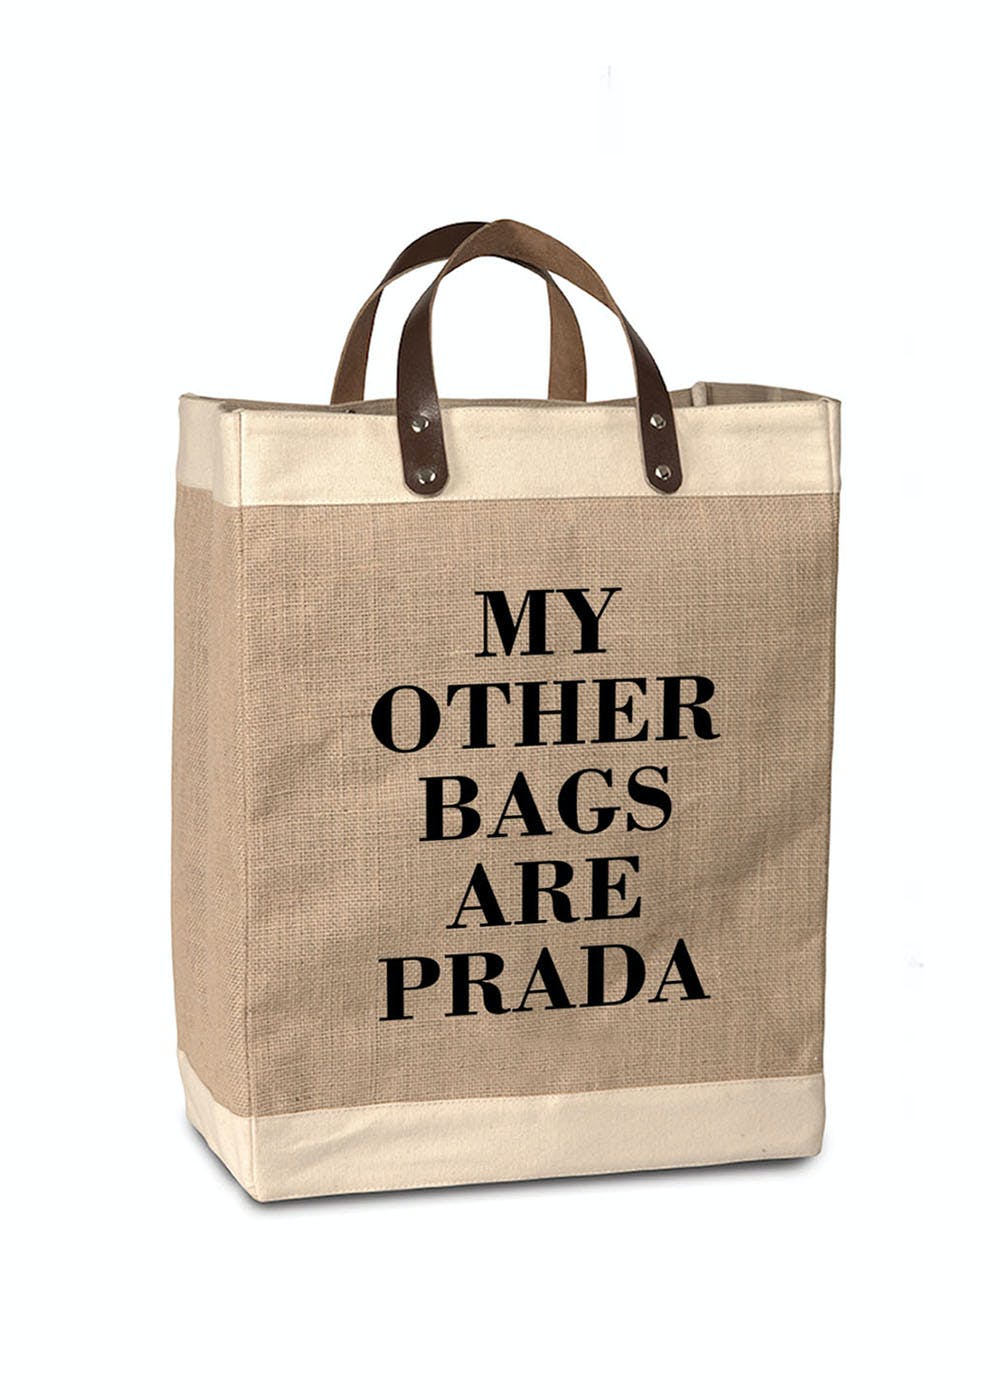 Get My Other Bags Are Prada Graphic Tote At 1499 Lbb Shop